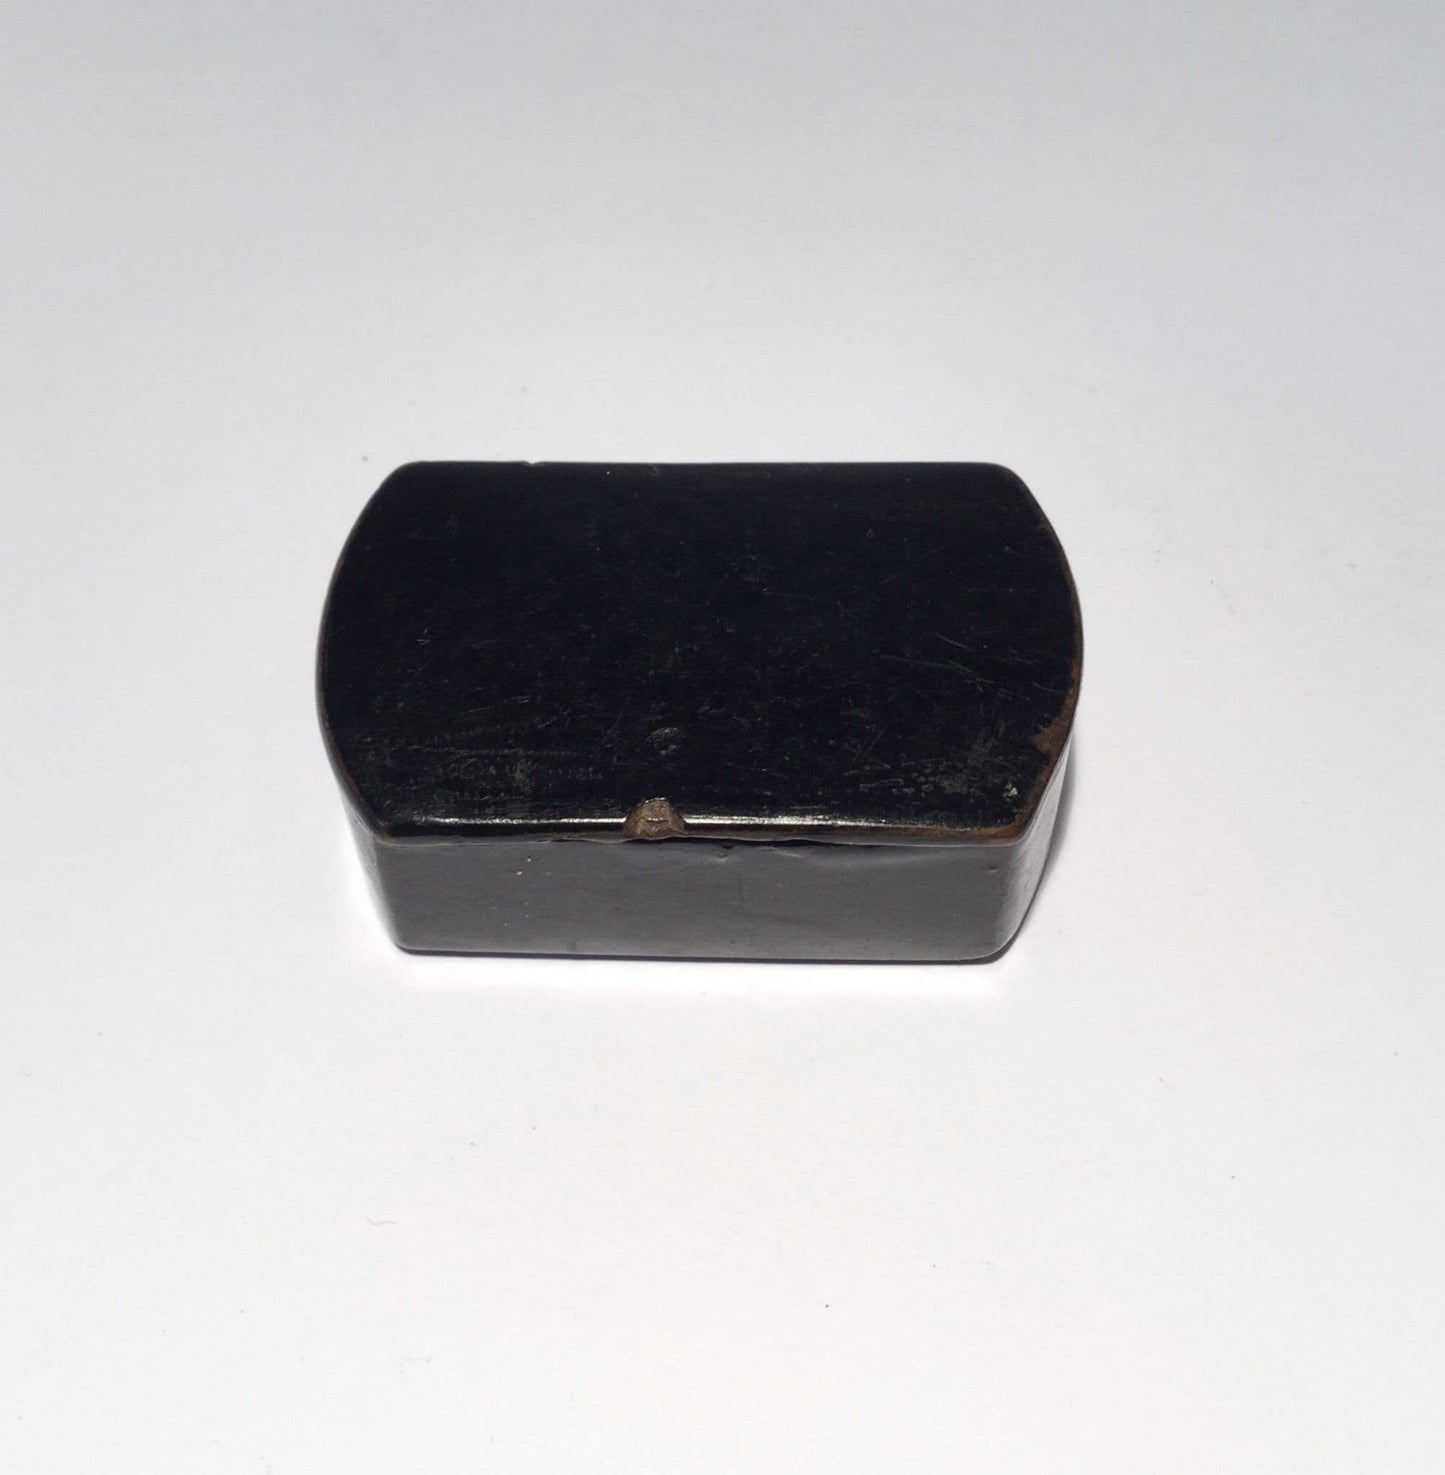 Antique Black Lacquered Trinket Box with Haberdashery Pins